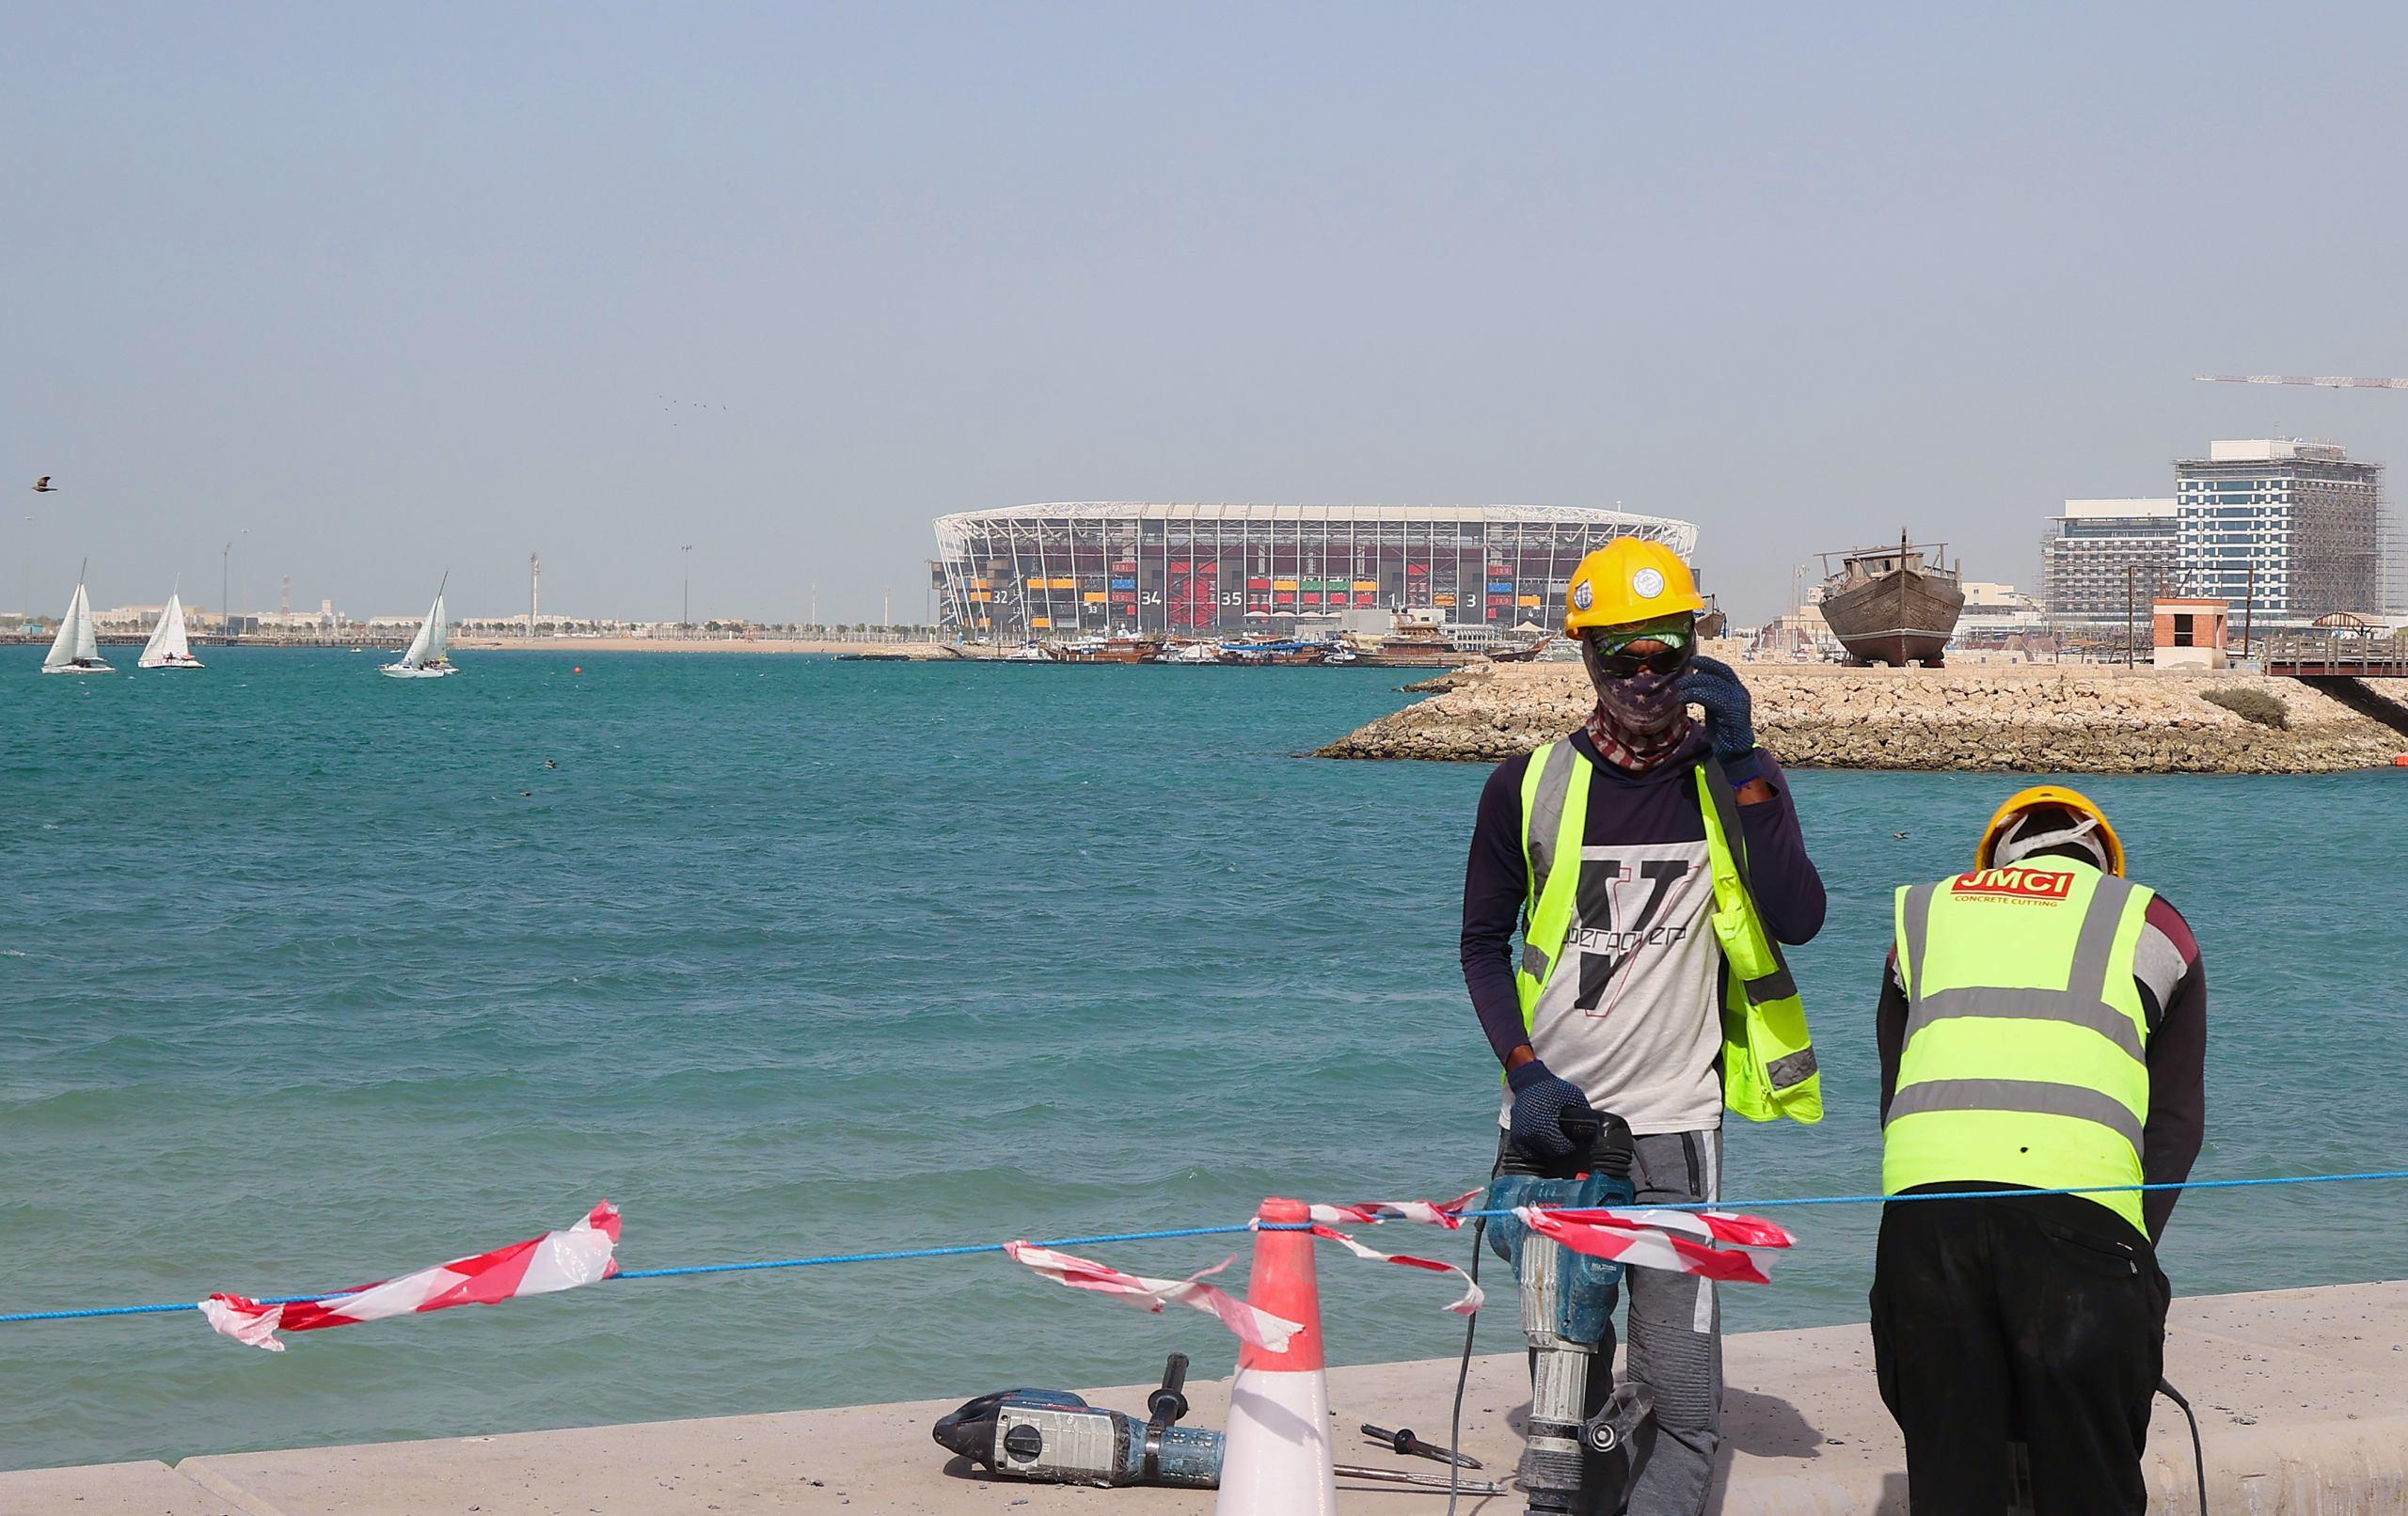 A picture taken on May 21, 2022, shows workers across from the 974 Stadium, formerly knows as Ras Abu Aboud, in the Qatari capital Doha, which will host matches of the FIFA football World Cup 2022. (Photo by KARIM JAAFAR / AFP)